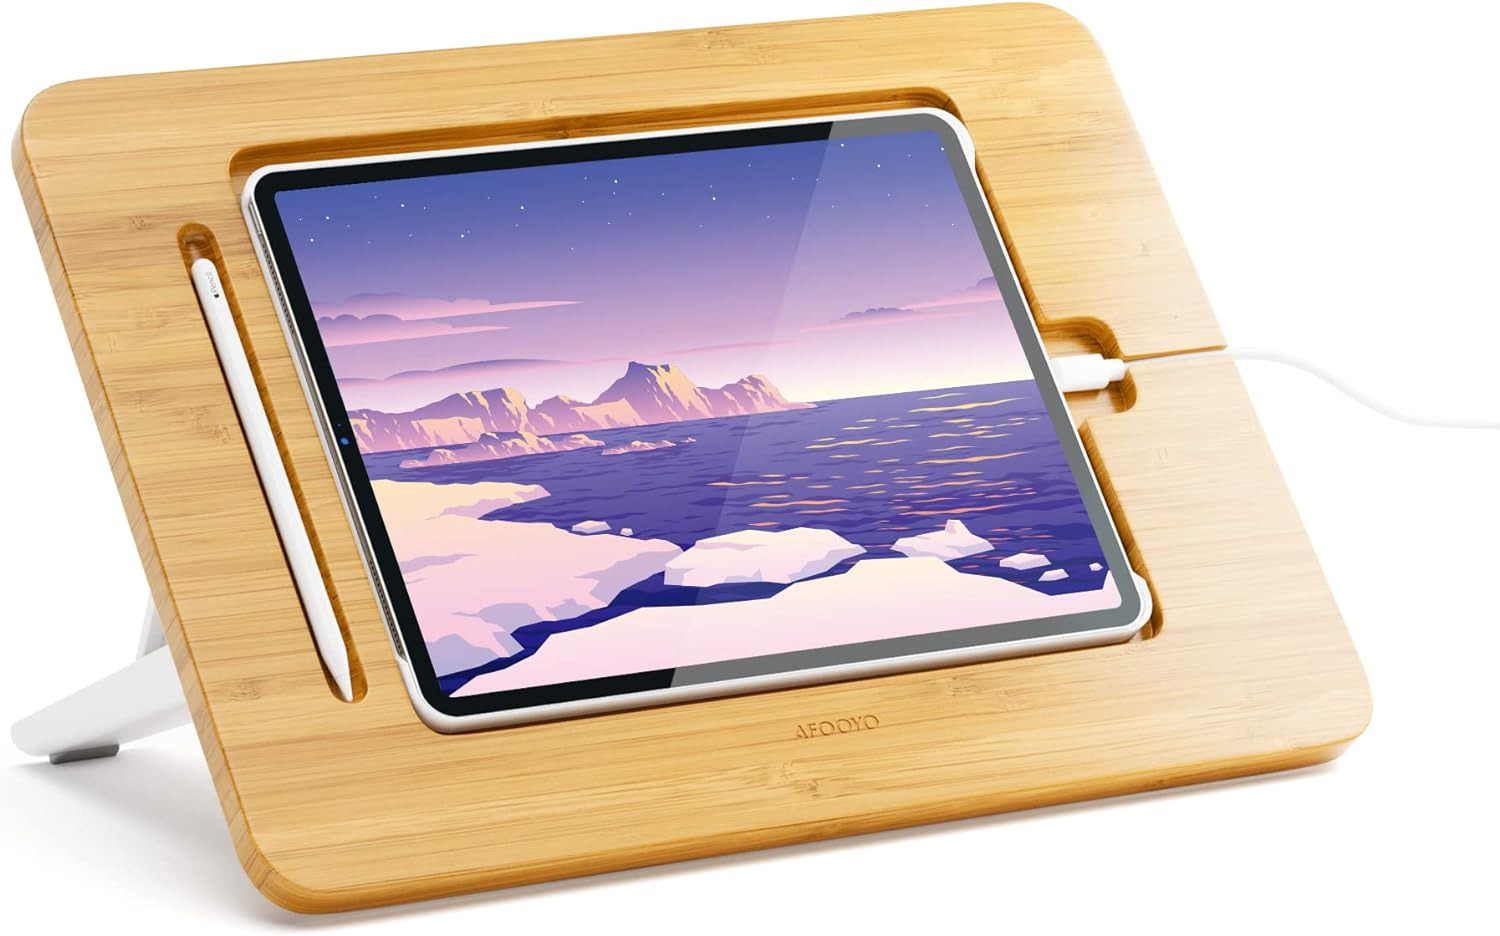 Wooden Ipad Drawing Stand Tablet Stand - Adjustable 5 Angles for Laptop, Laptop 